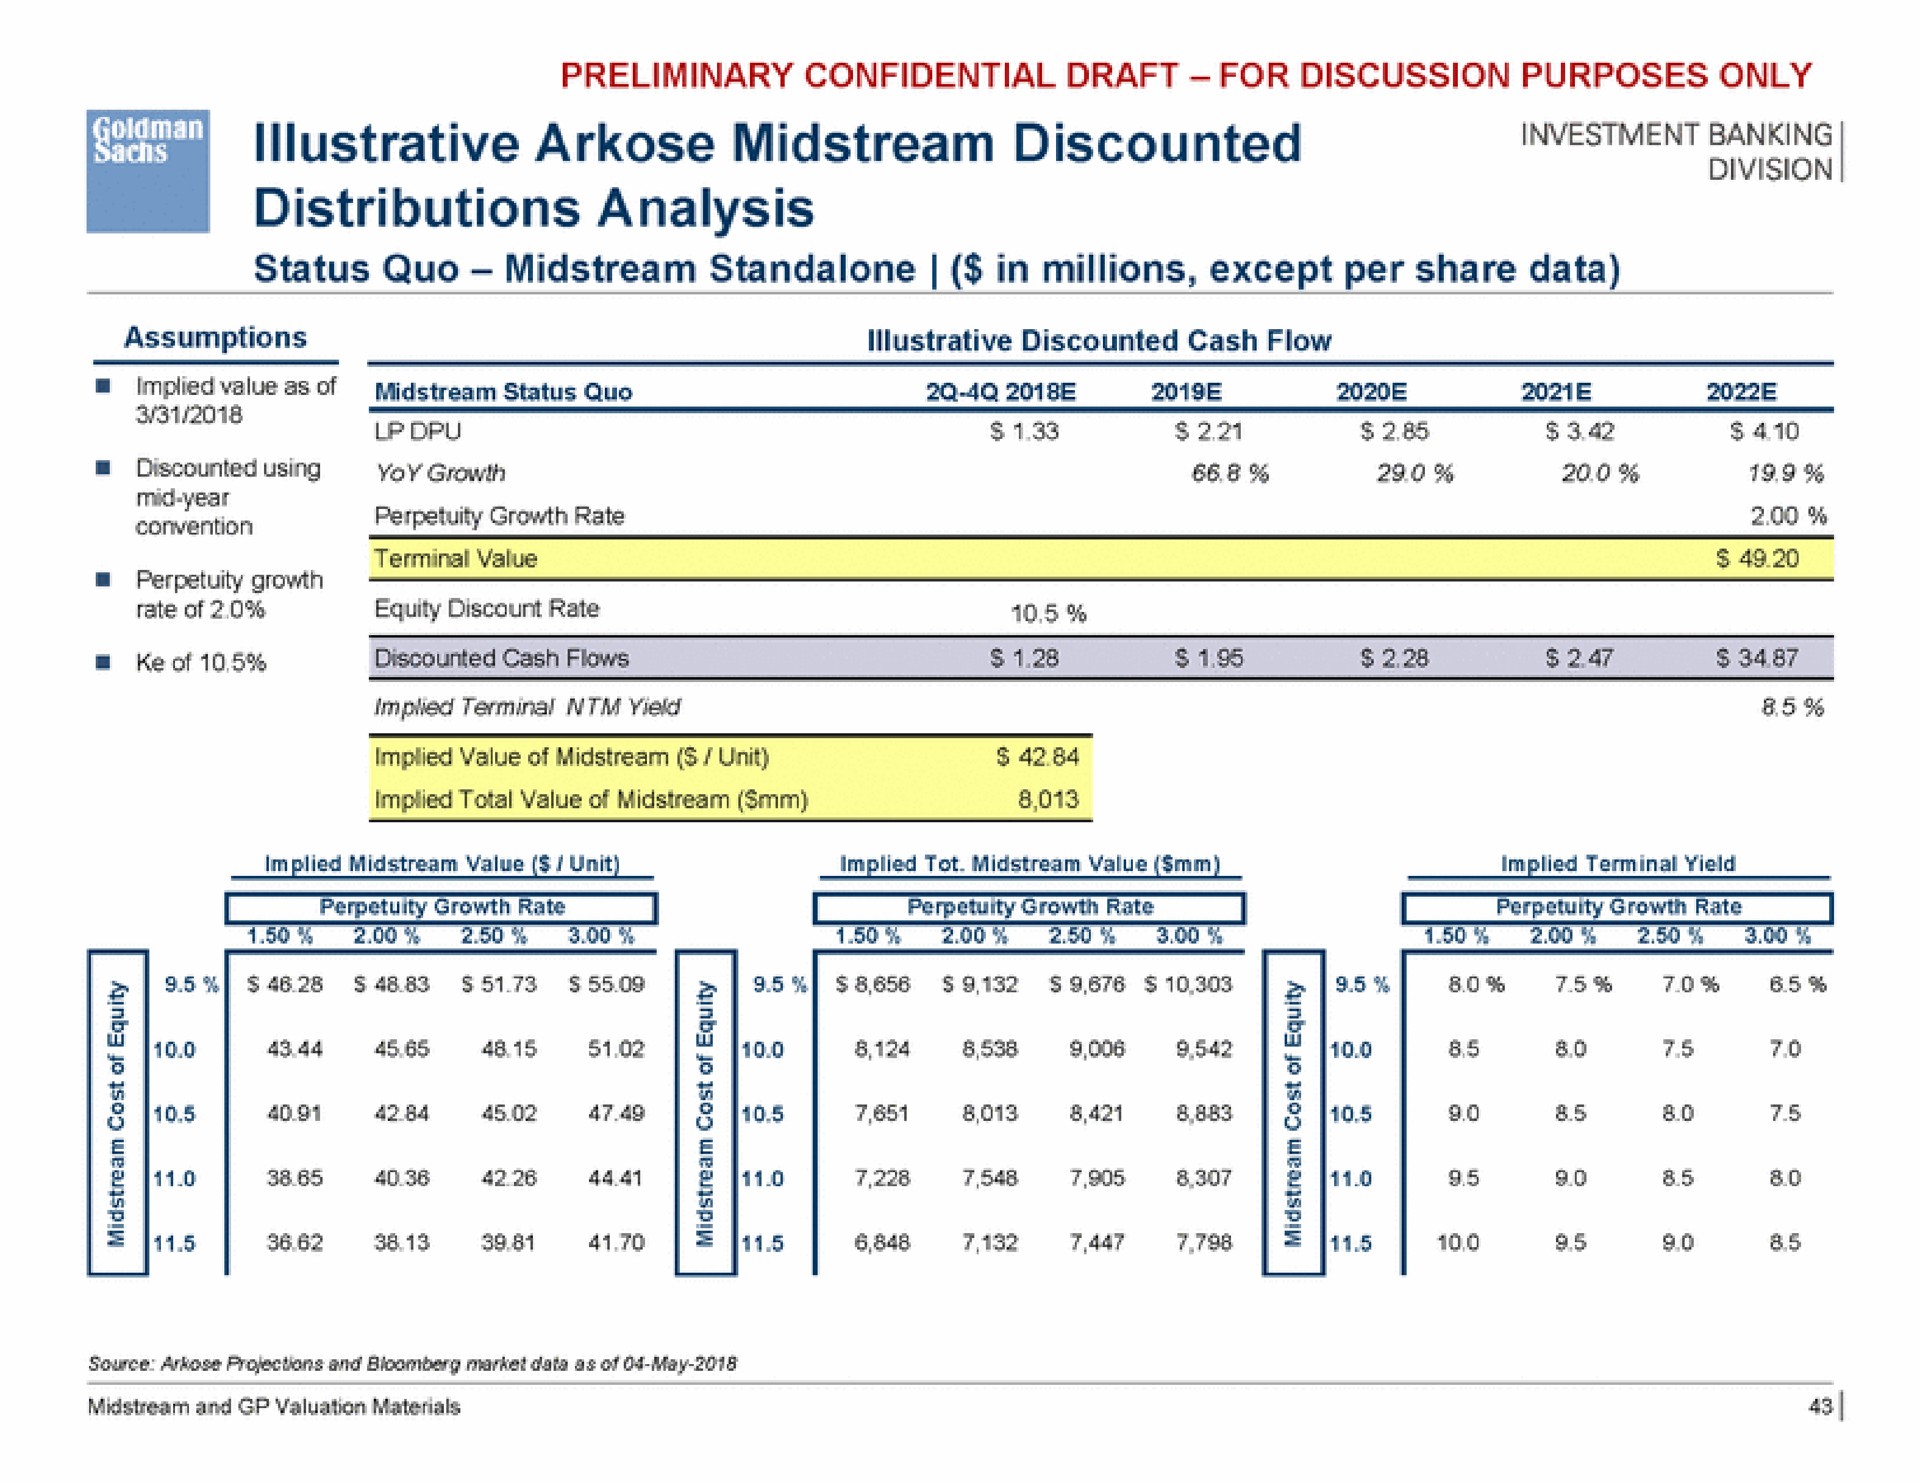 investment banking illustrative arkose midstream discounted distributions analysis perpetuity growth rate | Goldman Sachs